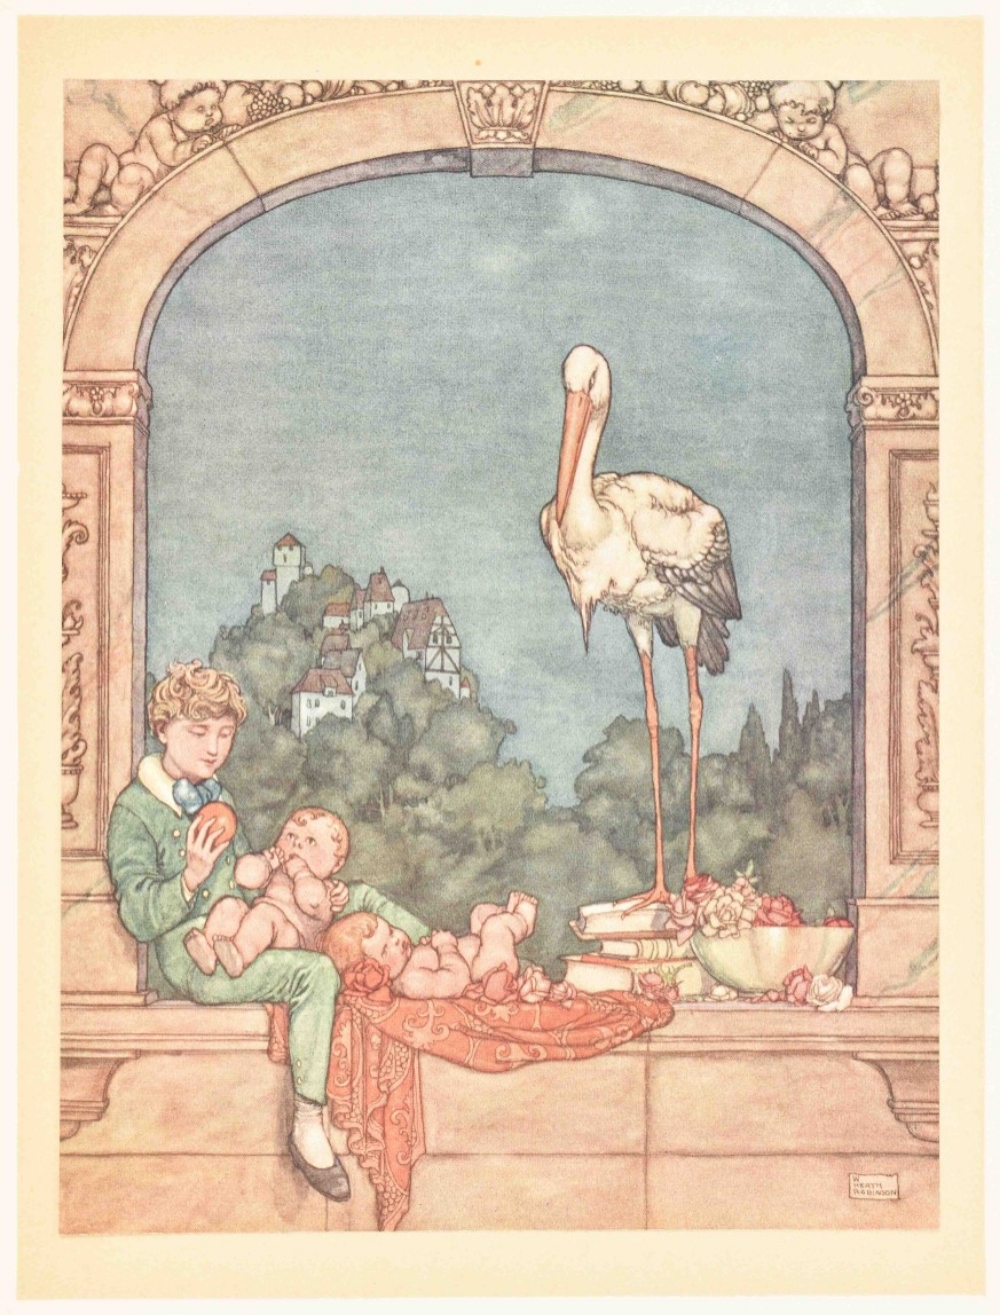 Hans Andersen. Fairy tales. With illustrations by W. Heath Robinson - Image 2 of 5